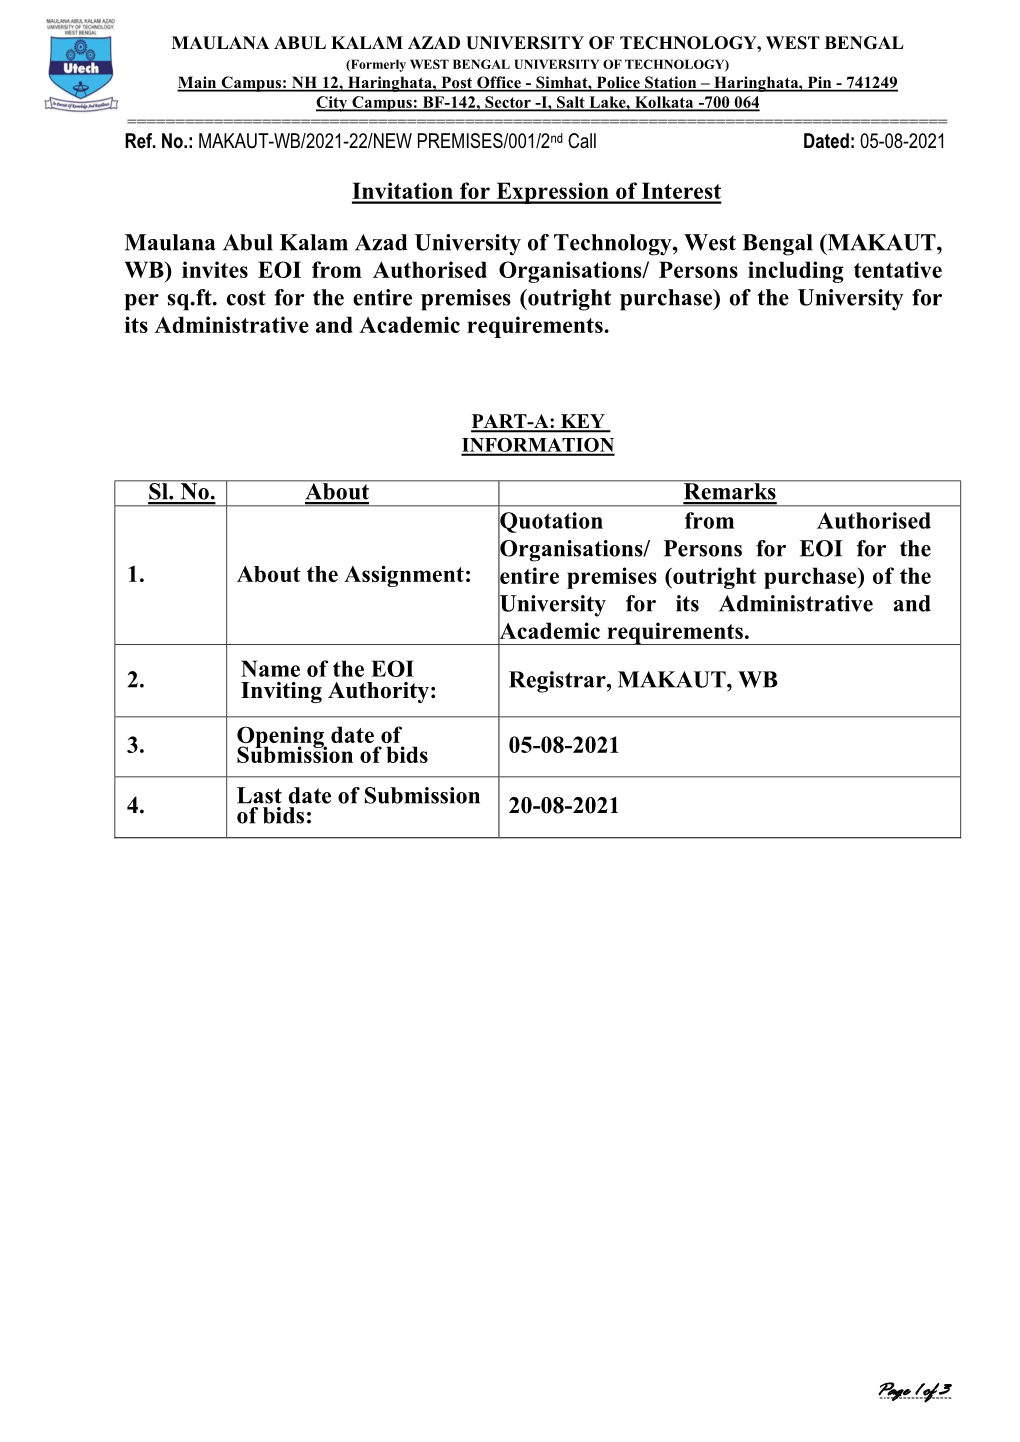 (MAKAUT, WB) Invites EOI from Authorised Organisations/ Persons Including Tentative Per Sq.Ft